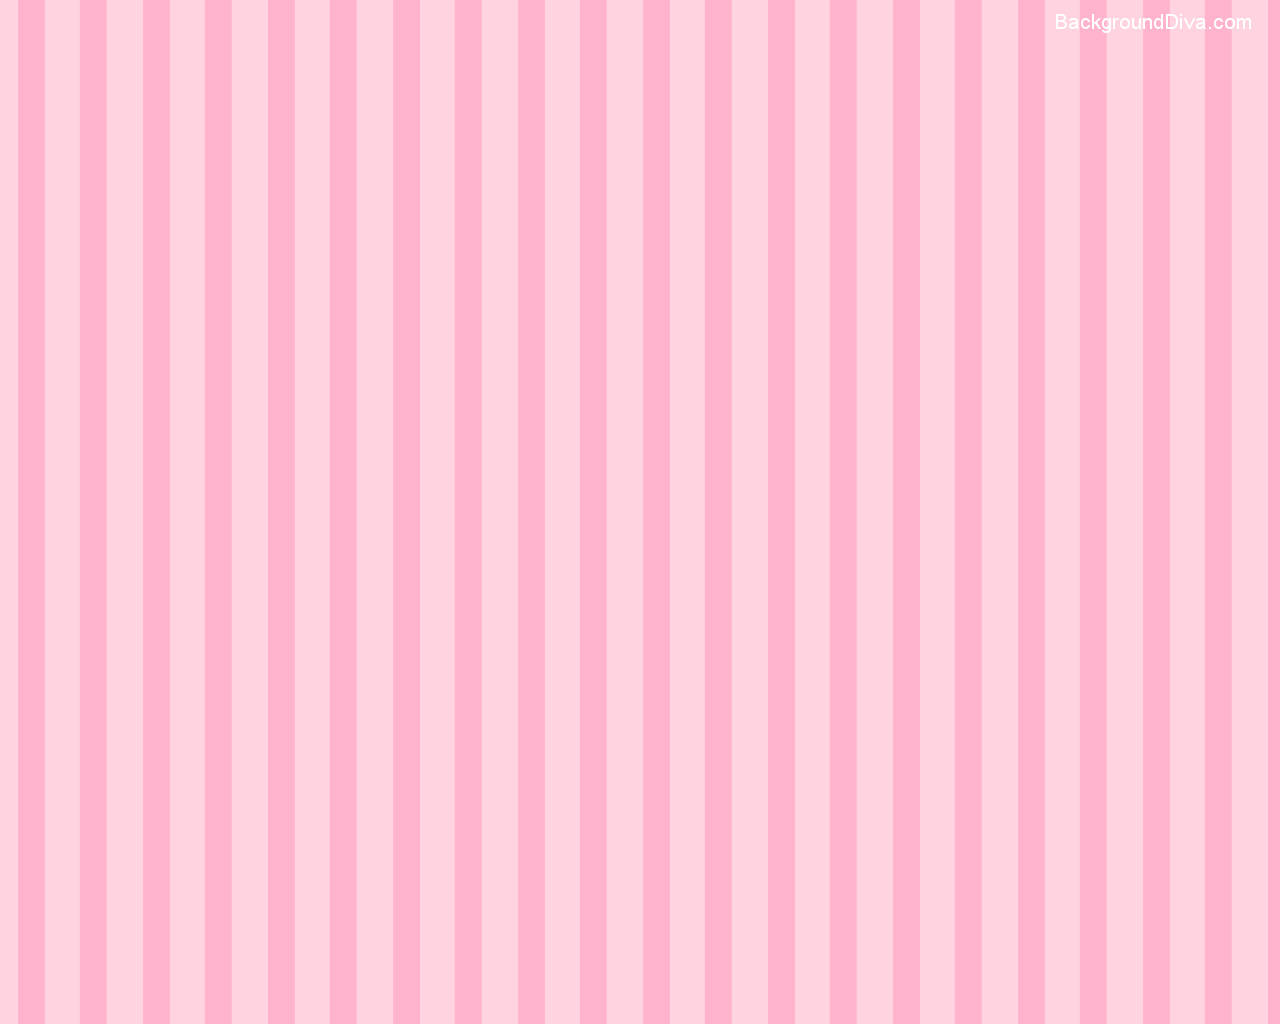 Light Pink 1280X1024 Wallpaper and Background Image